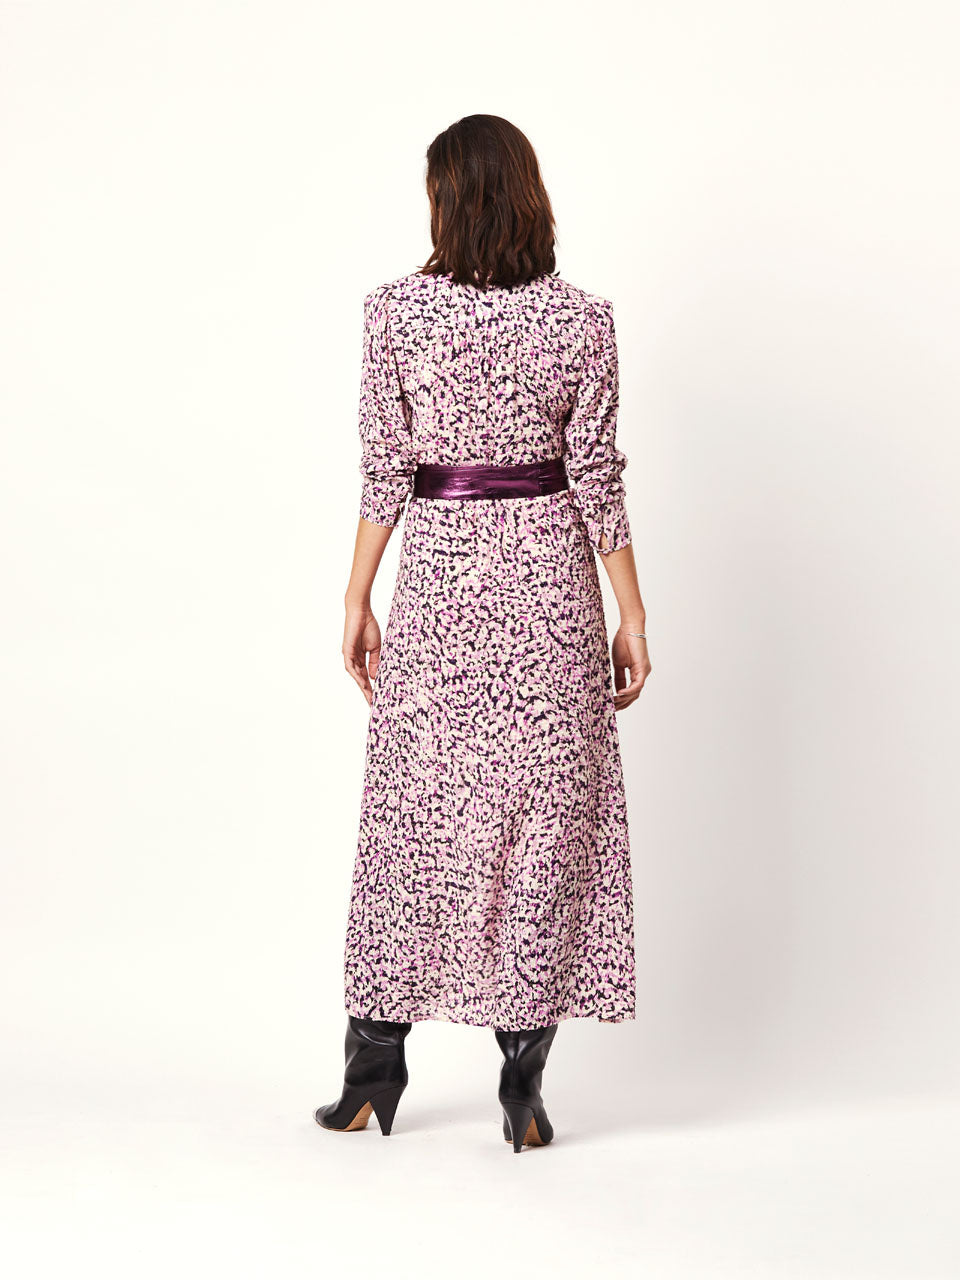 Printed maxi dress with matching belt